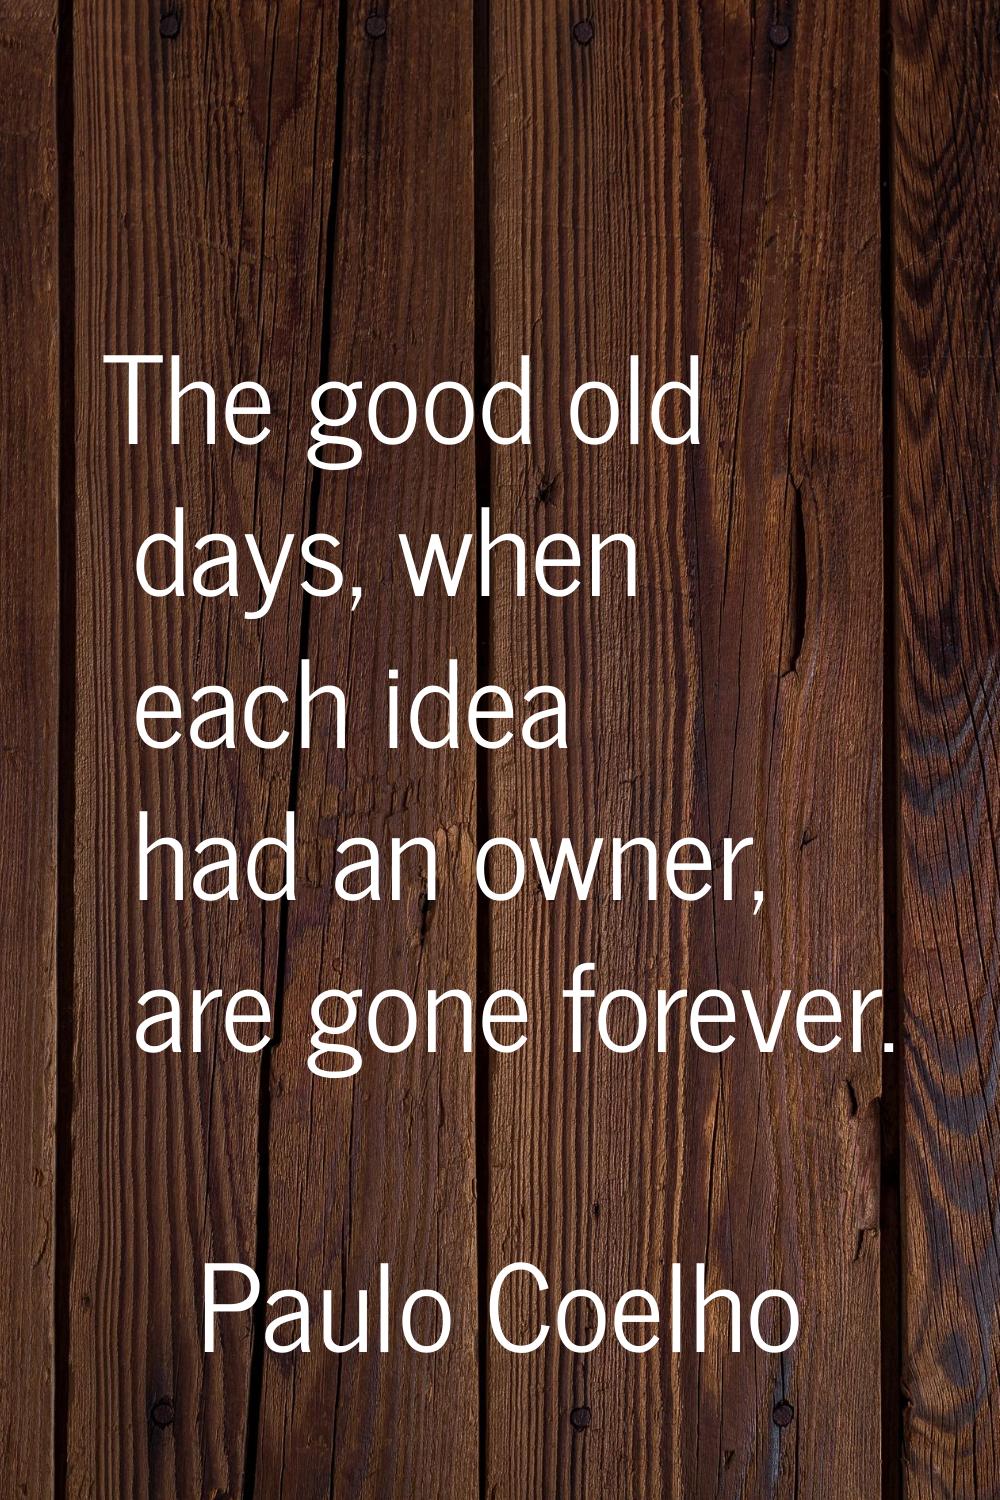 The good old days, when each idea had an owner, are gone forever.